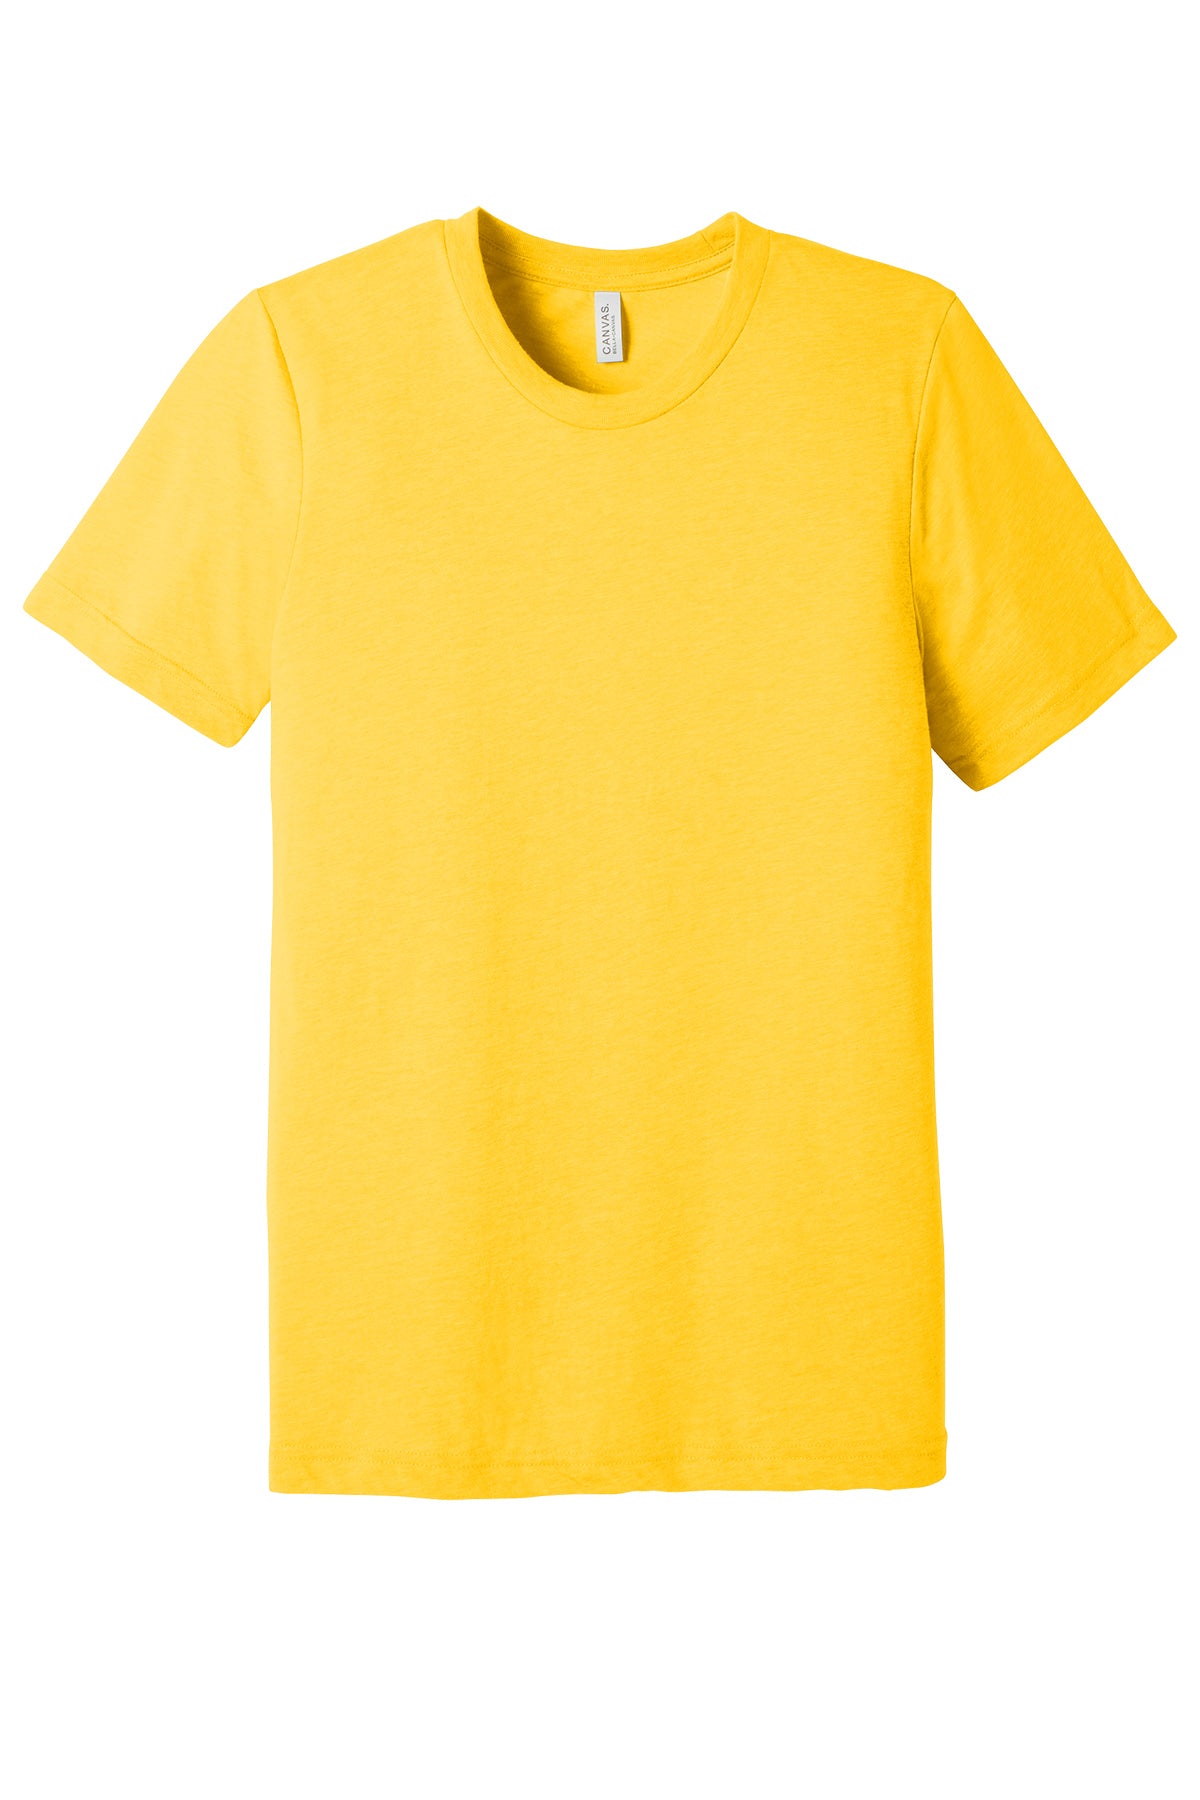 Bella+Canvas Bc3413 Adult T-Shirt Ad Small / Yellow Gold Triblend